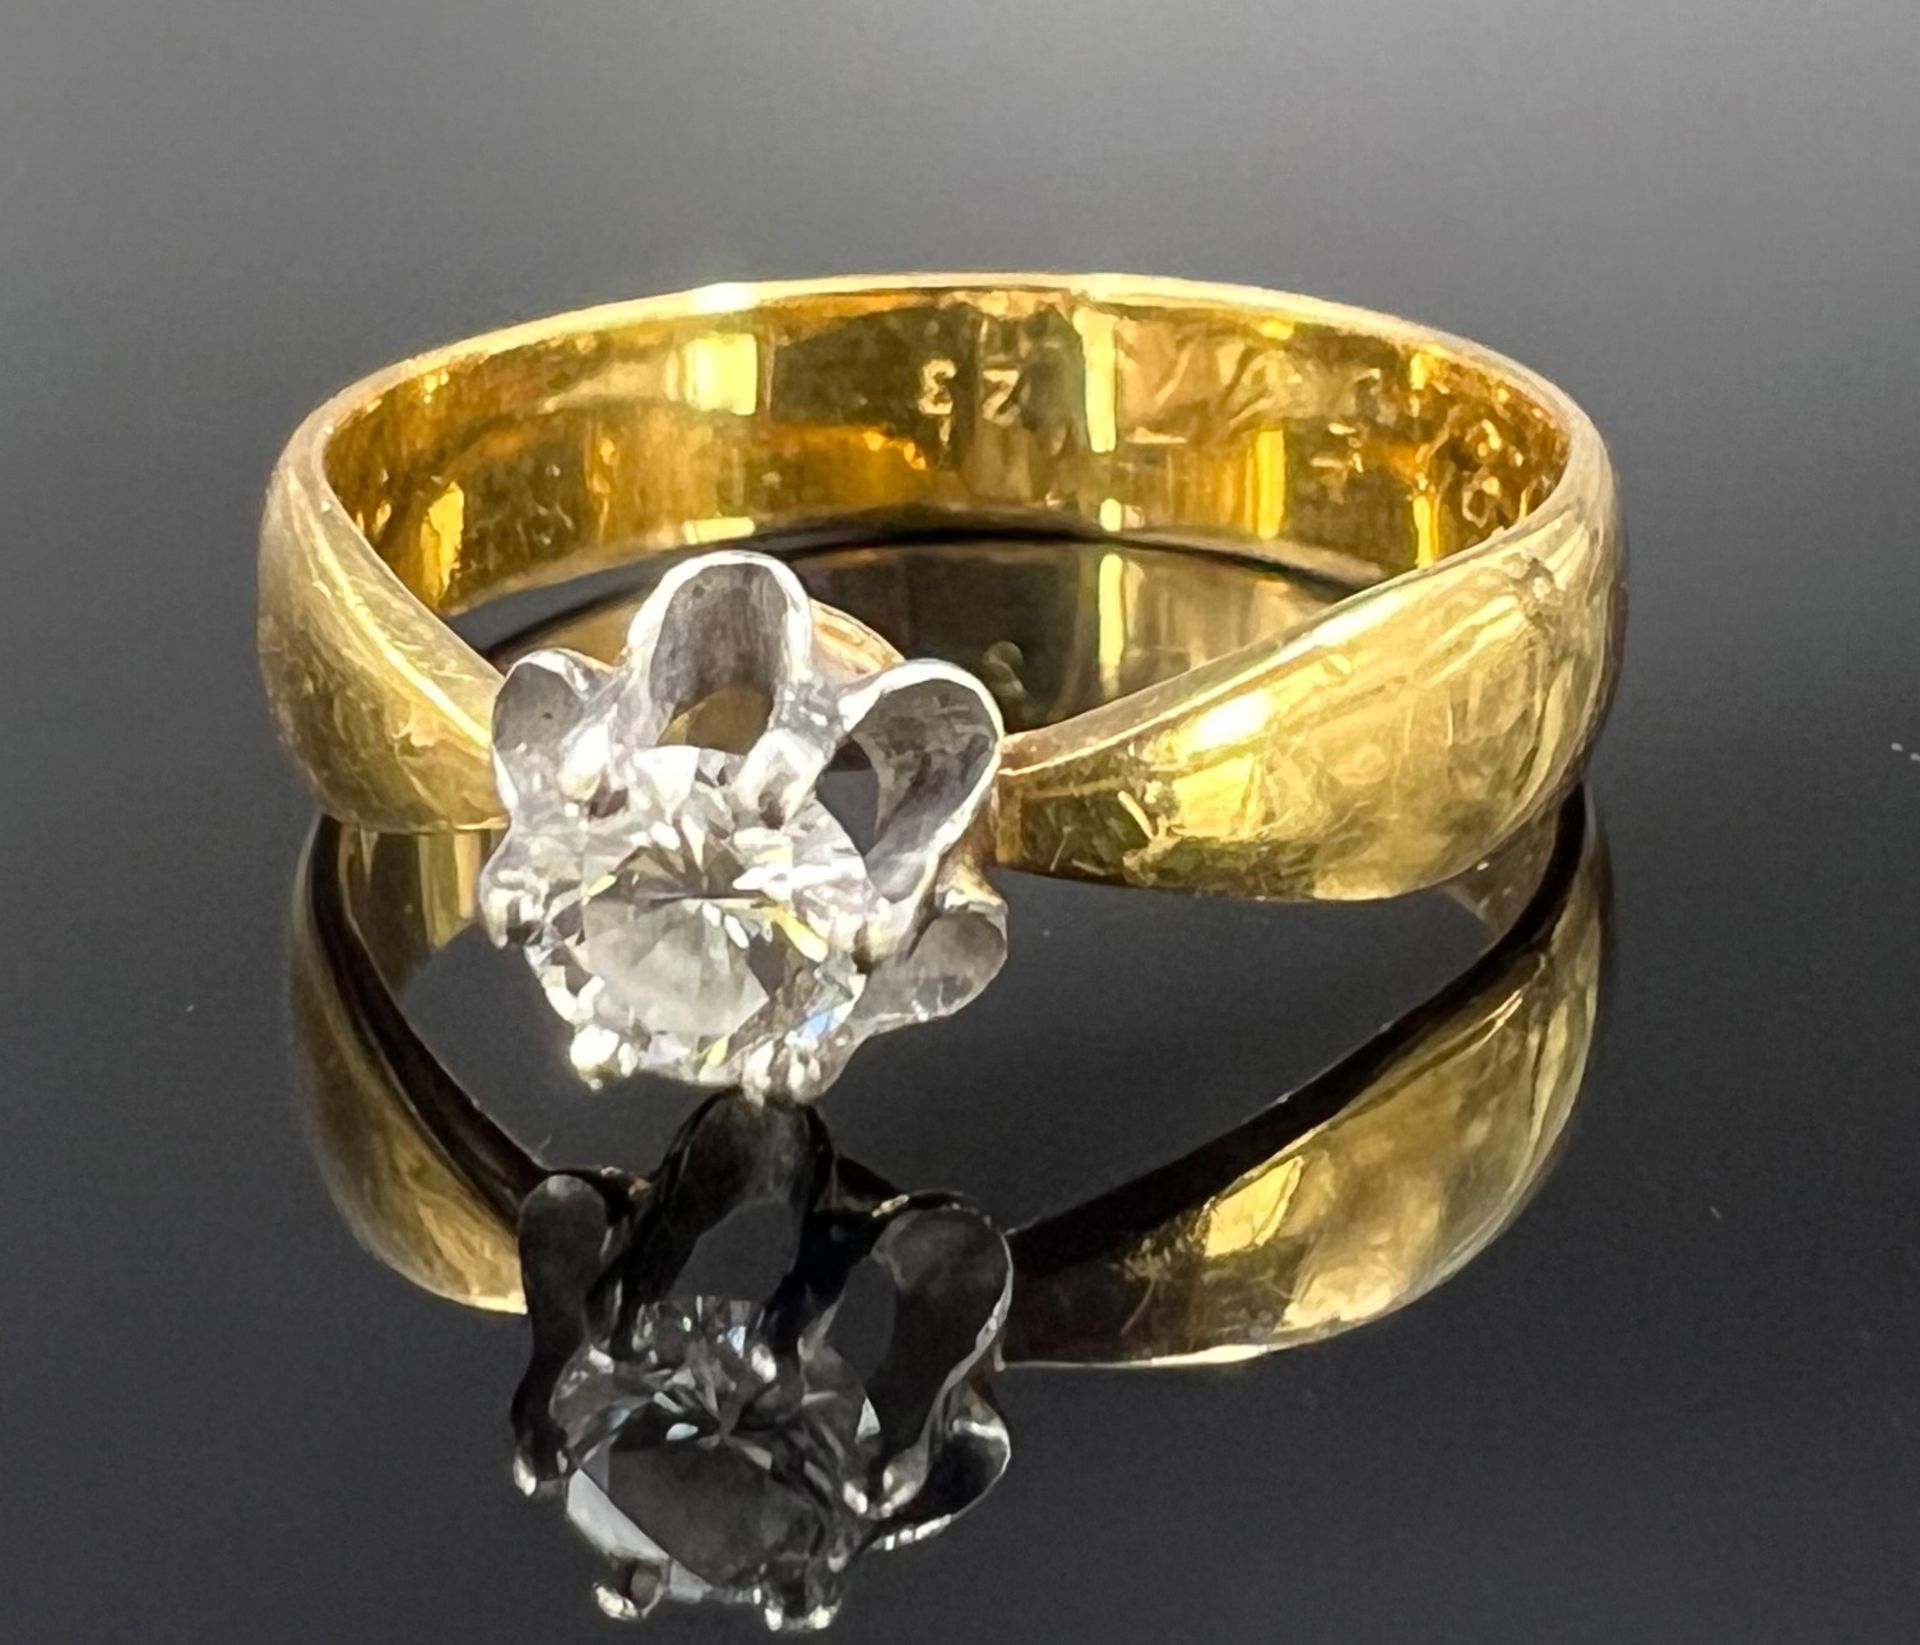 Solitaire ring. 900 yellow gold. 1 diamond of approx. 0.17-0.20 ct.